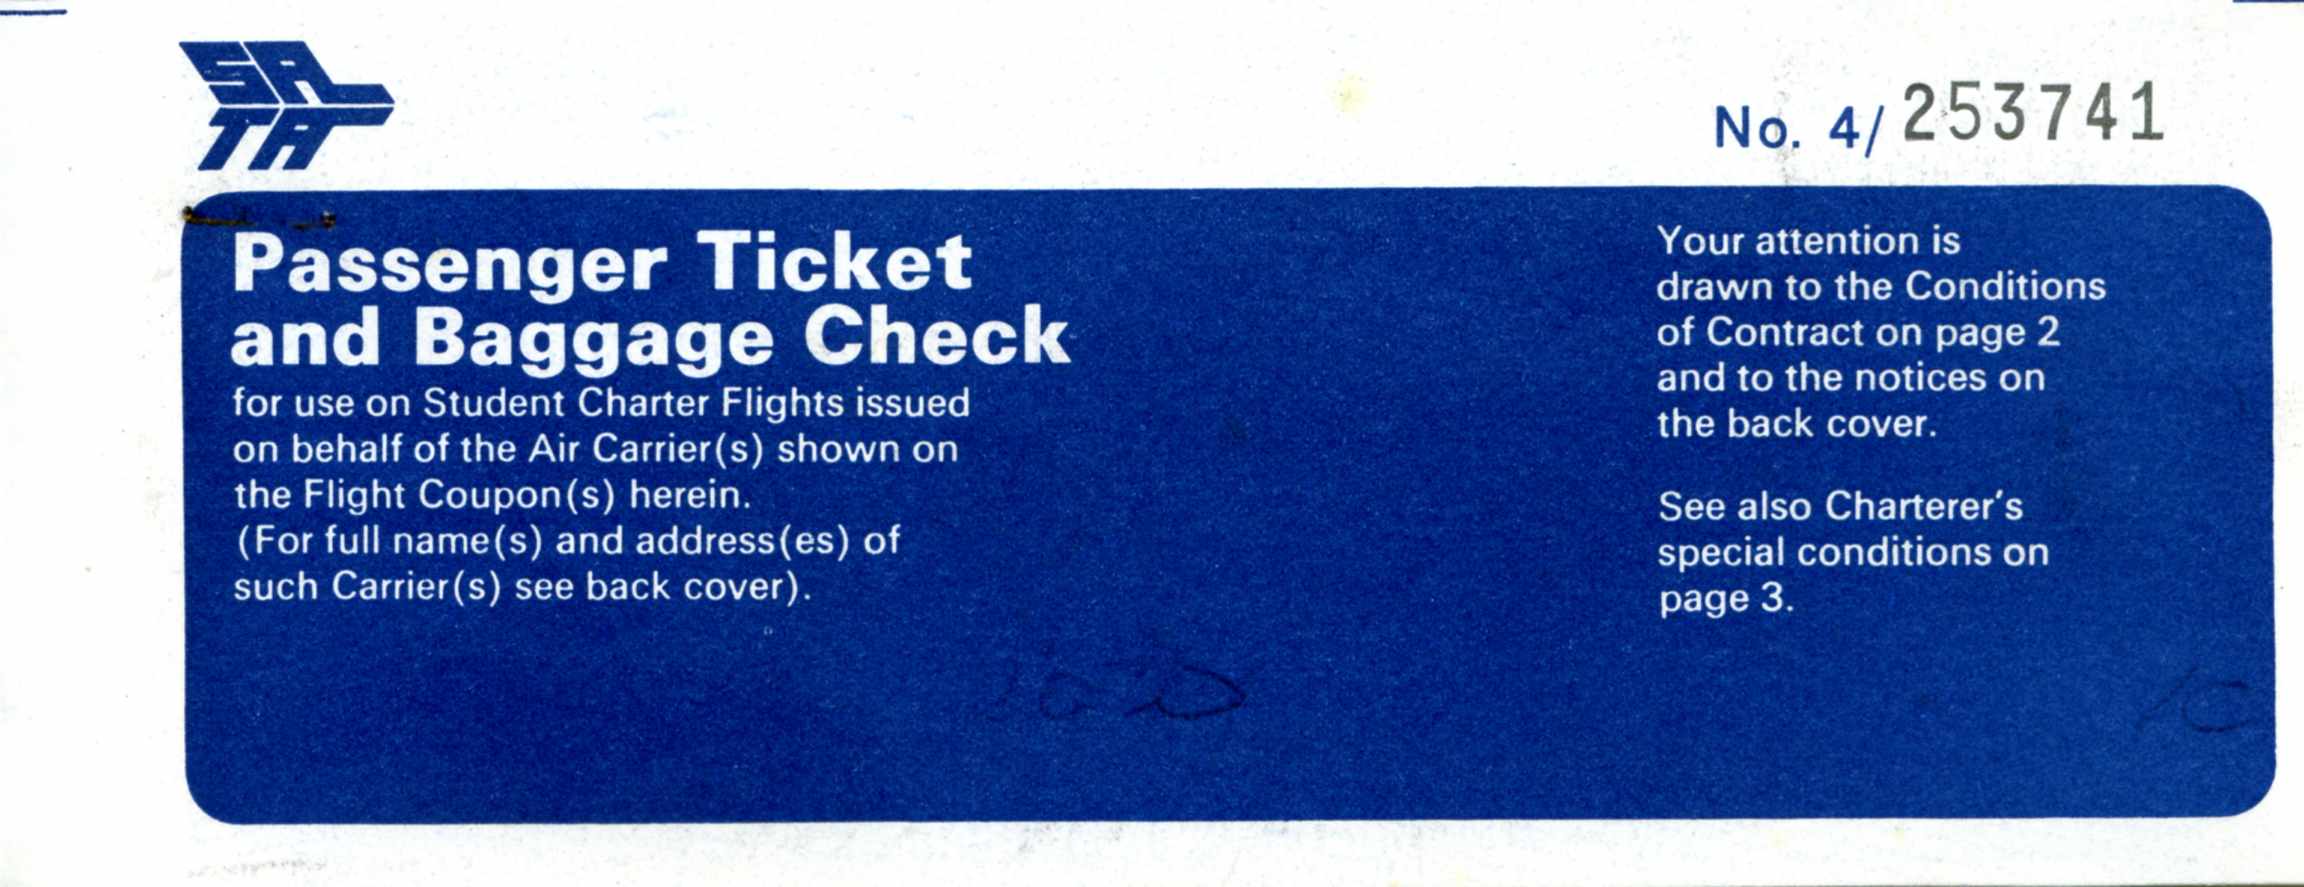 order flight ticket from CVG to SBA by phone